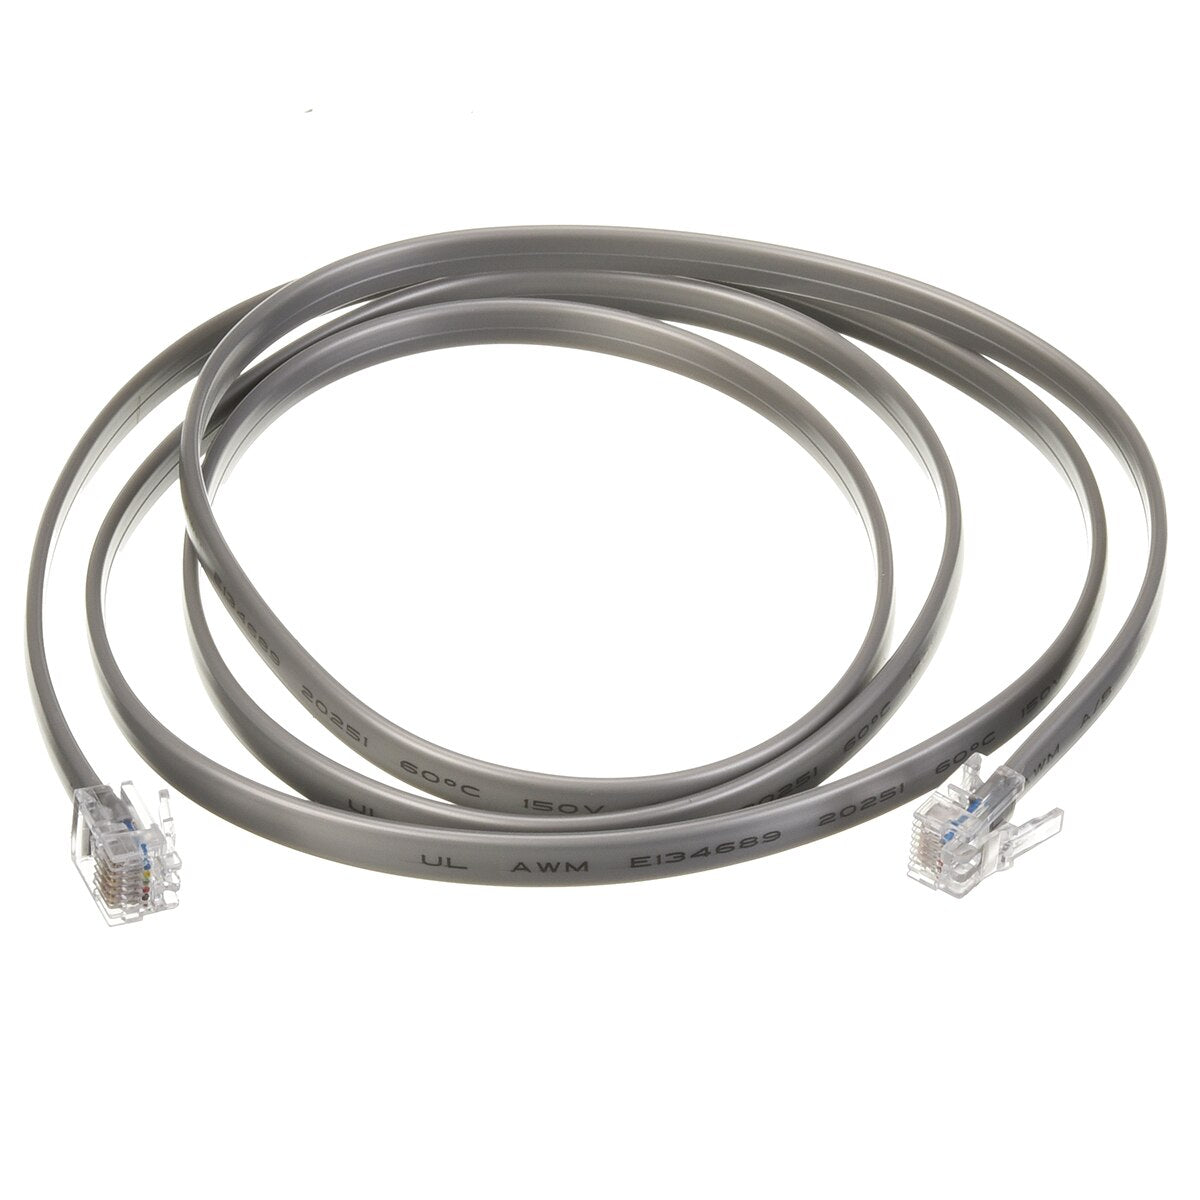 RJ25 Cable - 48" Model RCPN-AMP03-0013111101-0003